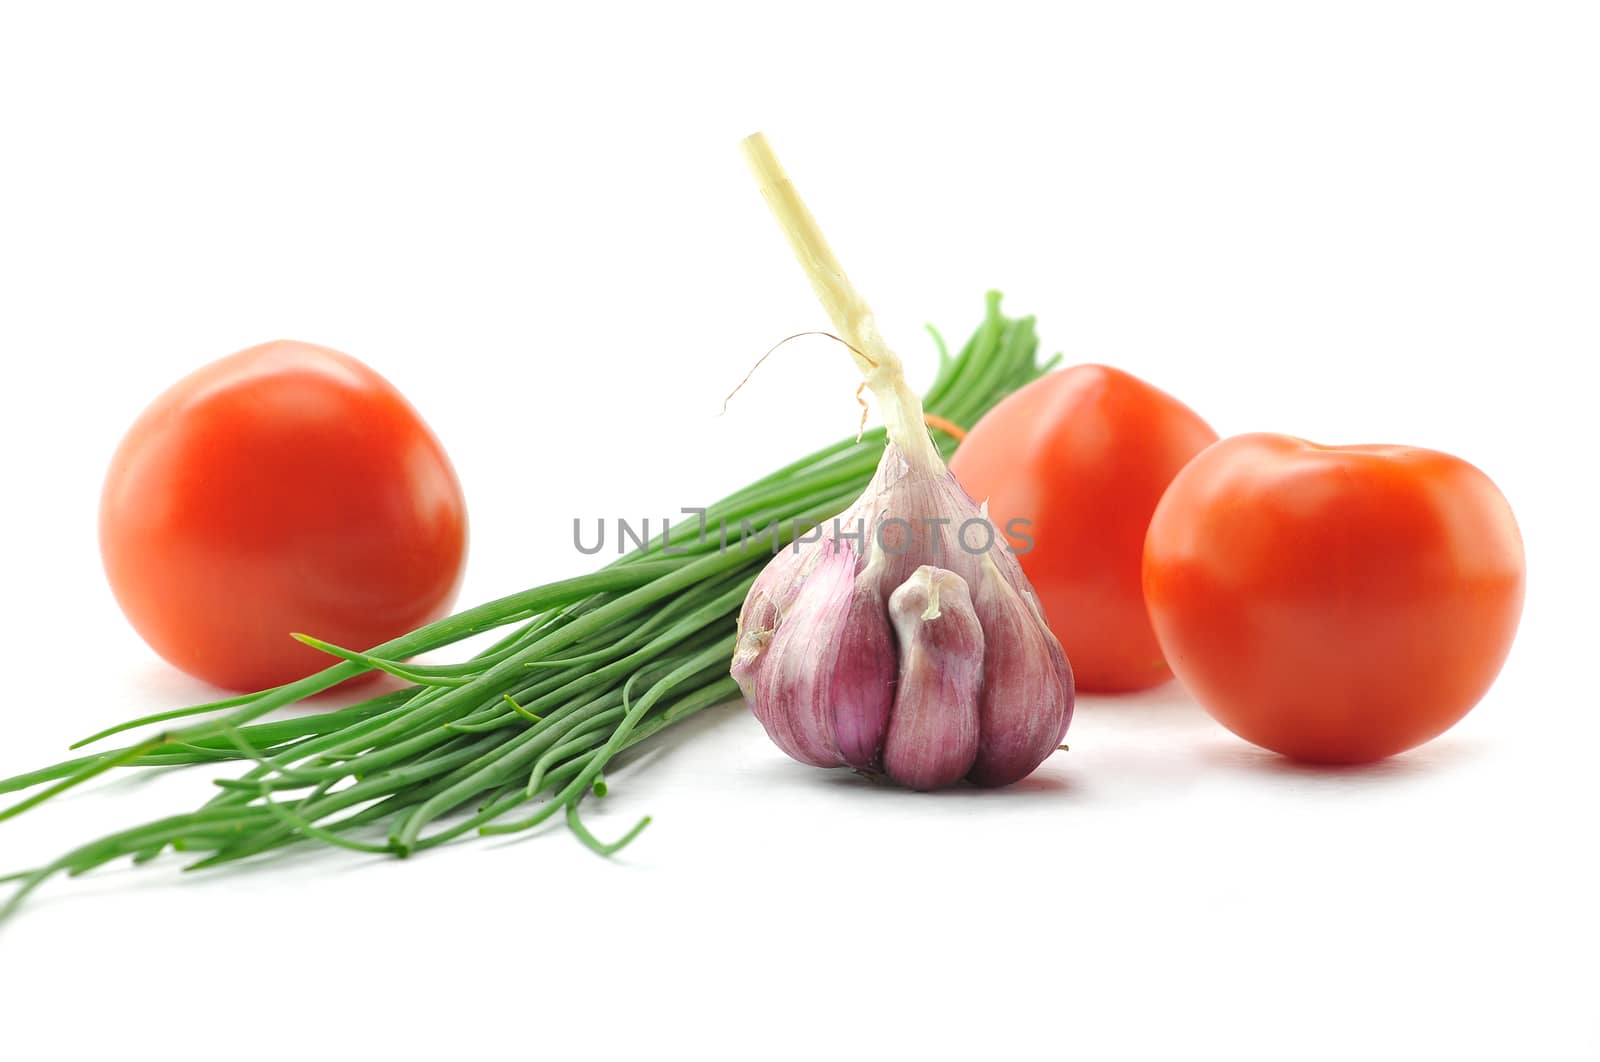 Mediterranean food ingredients: spring onions, garlic and tomato by xura